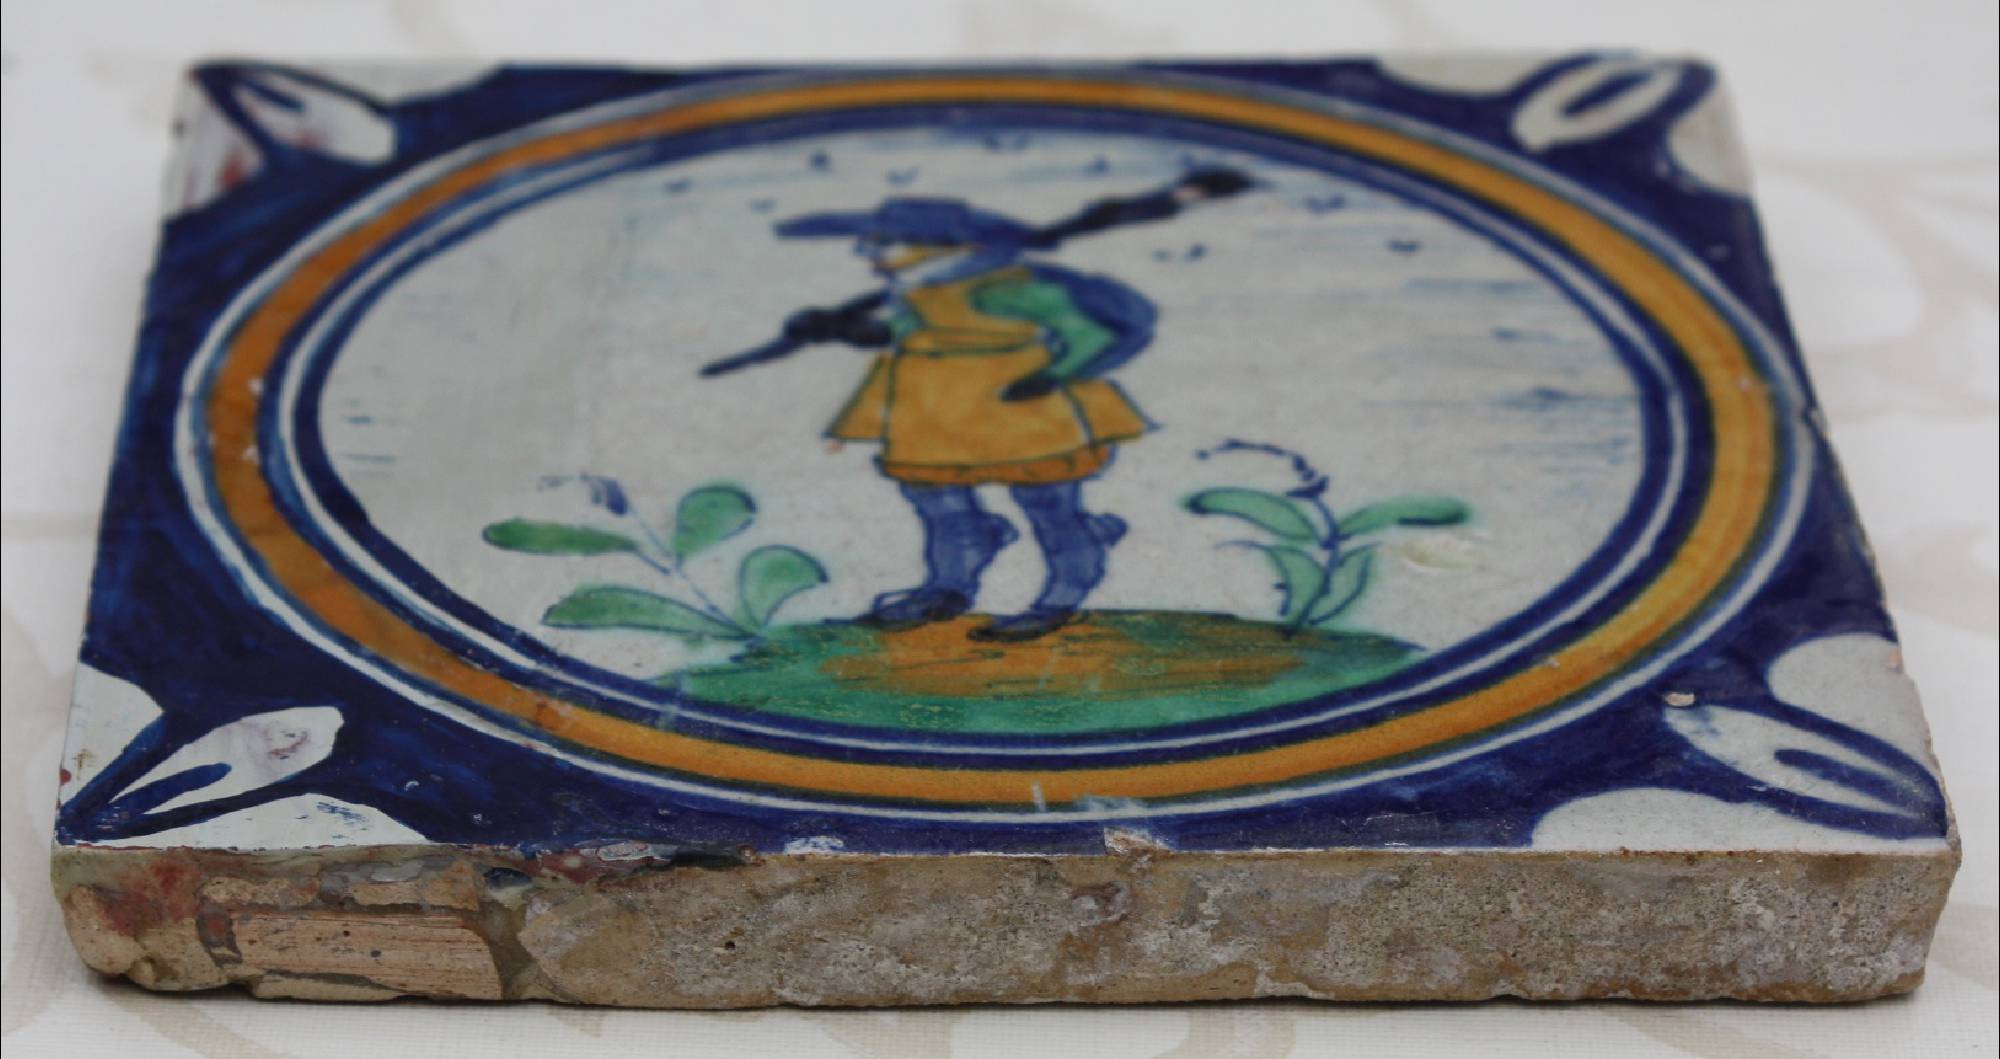 First half 17th century hand-painted antique polychrome Dutch stoneware medallion tile, showing a musketeer